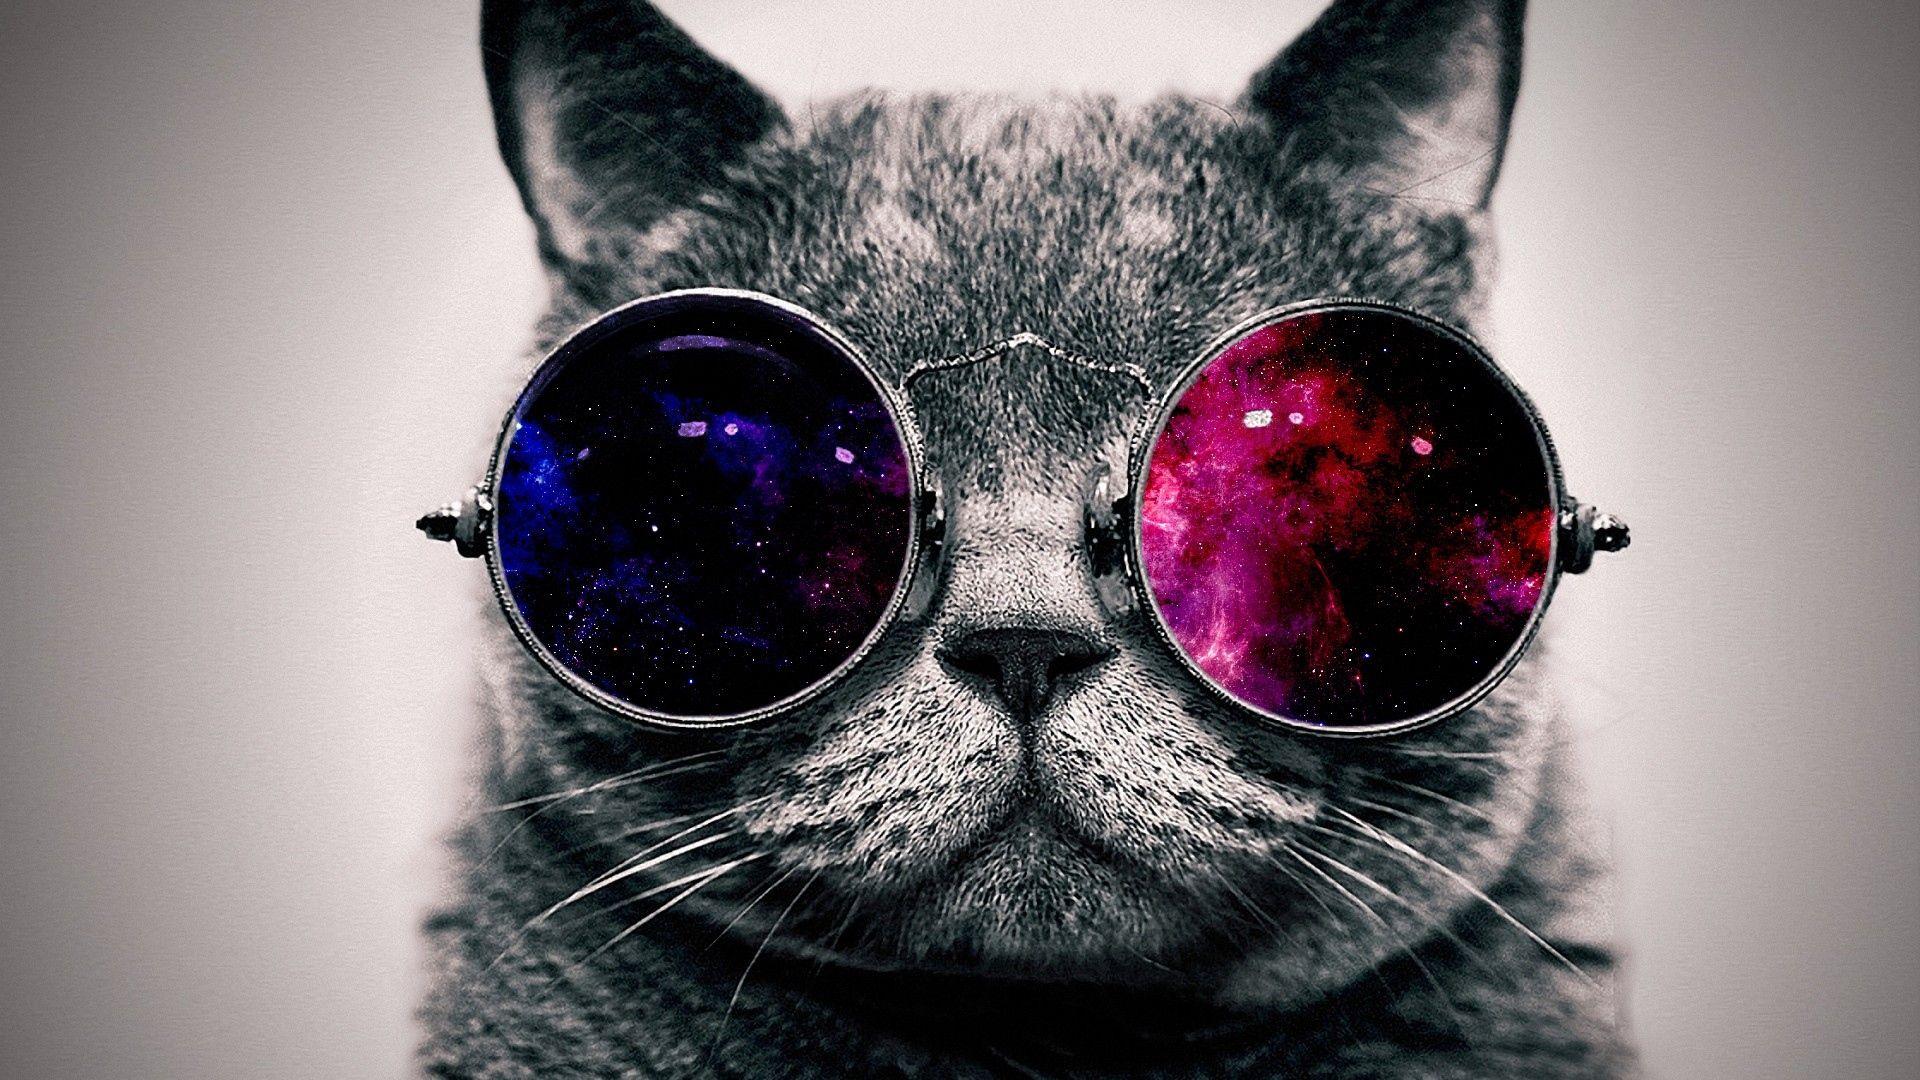  Cat  with Glasses  Wallpapers  Top Free Cat  with Glasses  